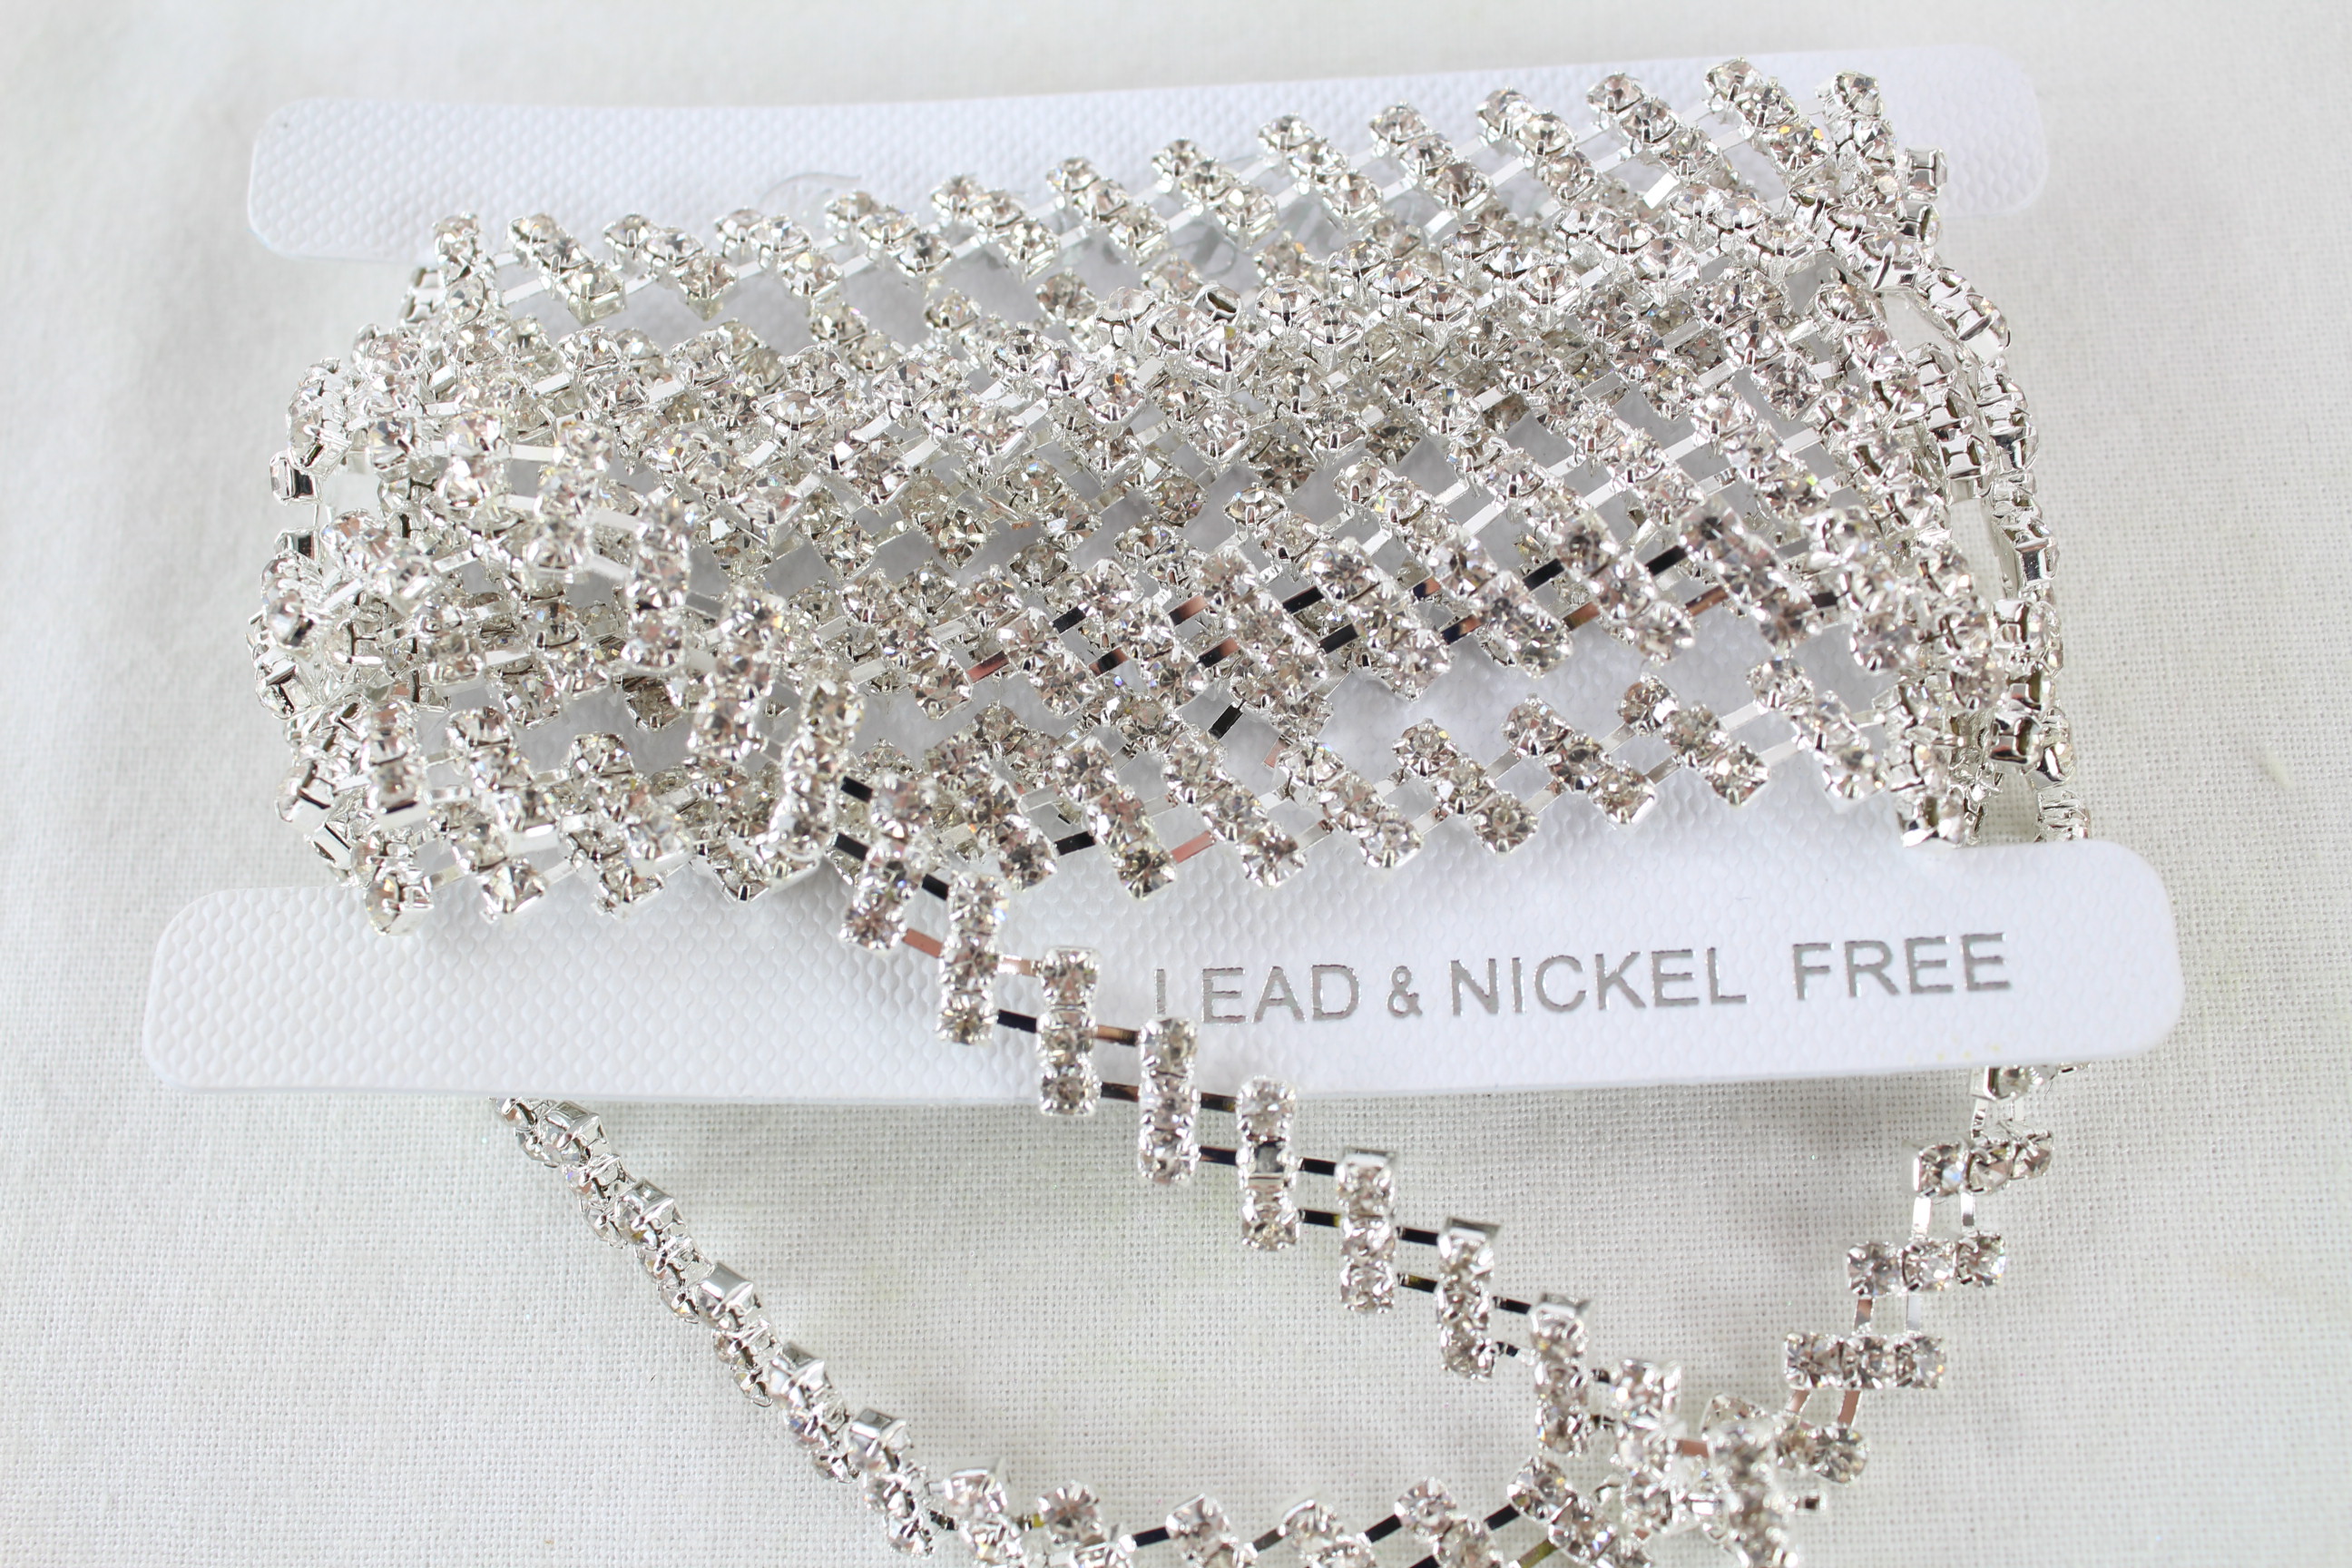 3 x 2 Metres Triple Angled Rhinestone Chain - BUY 3 FOR THE PRICE OF 2!